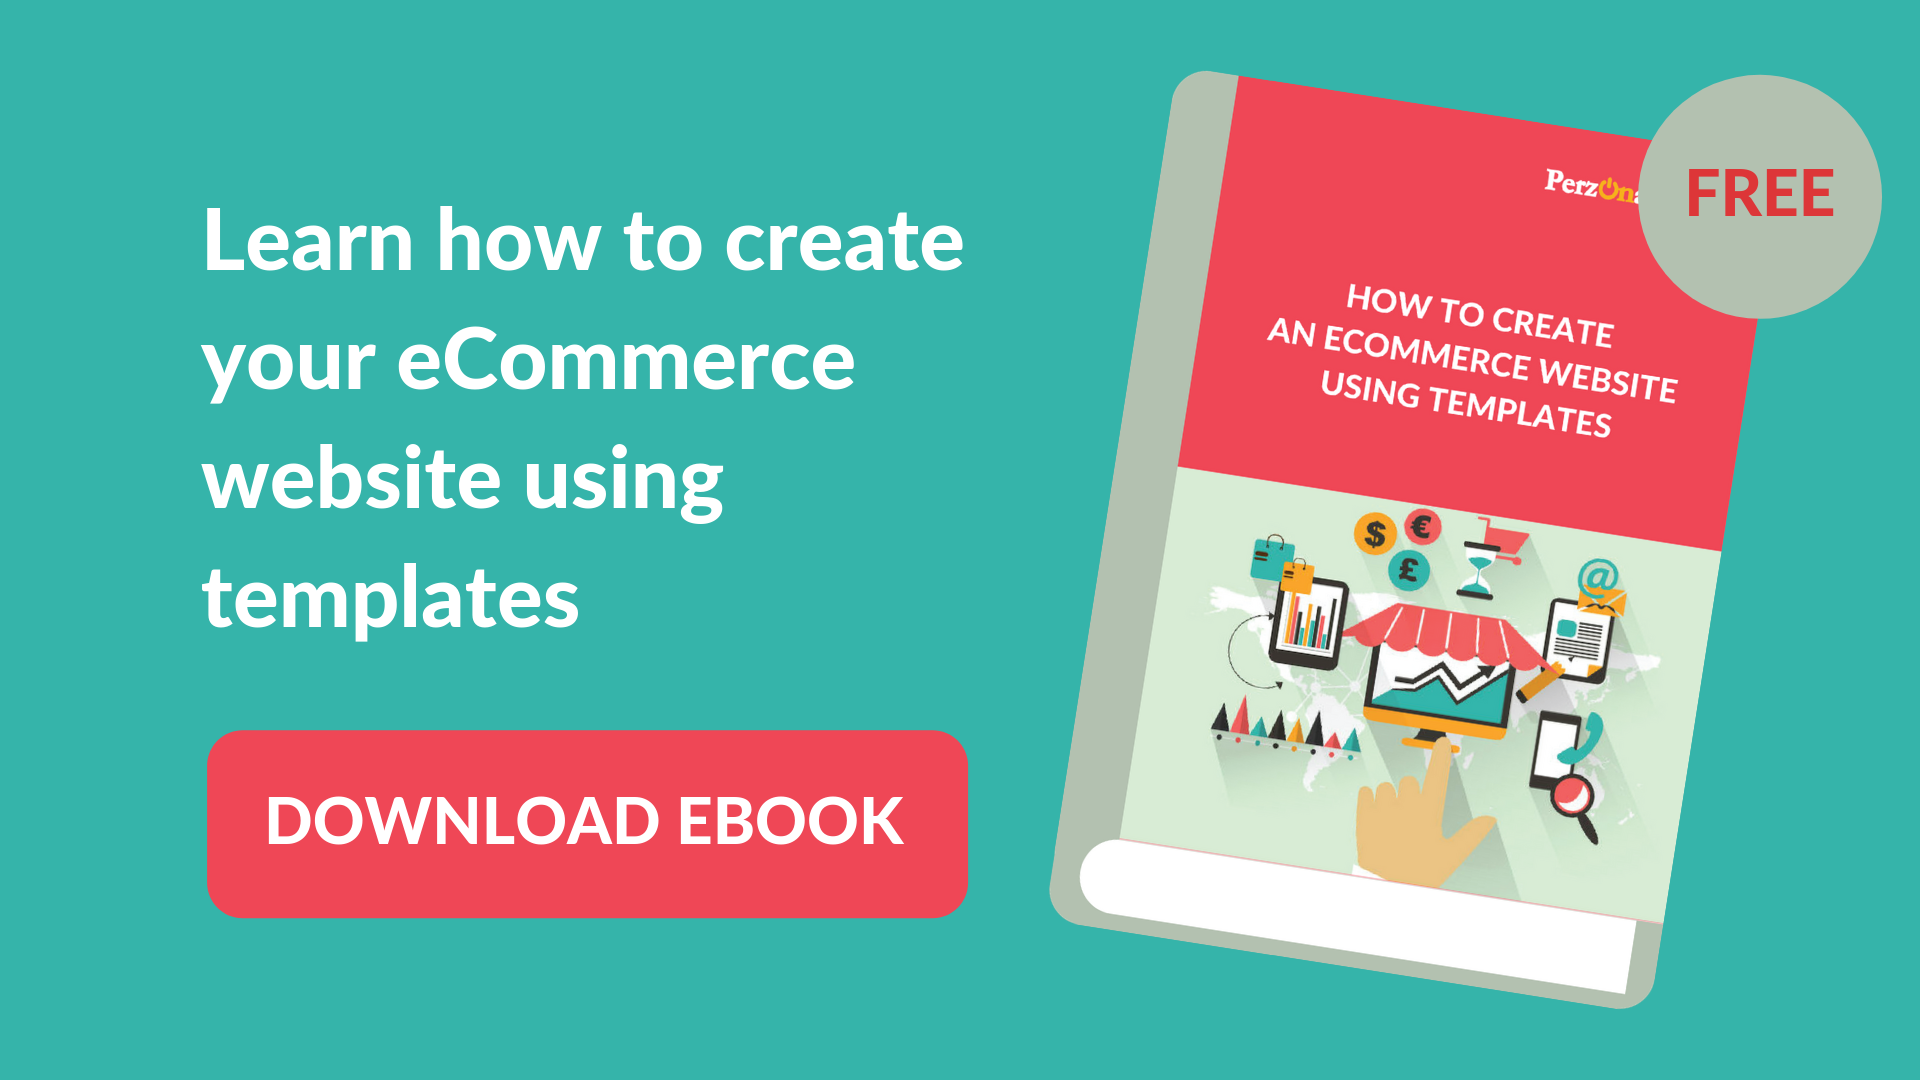 Download your free eBook: How to create an eCommerce website using templates